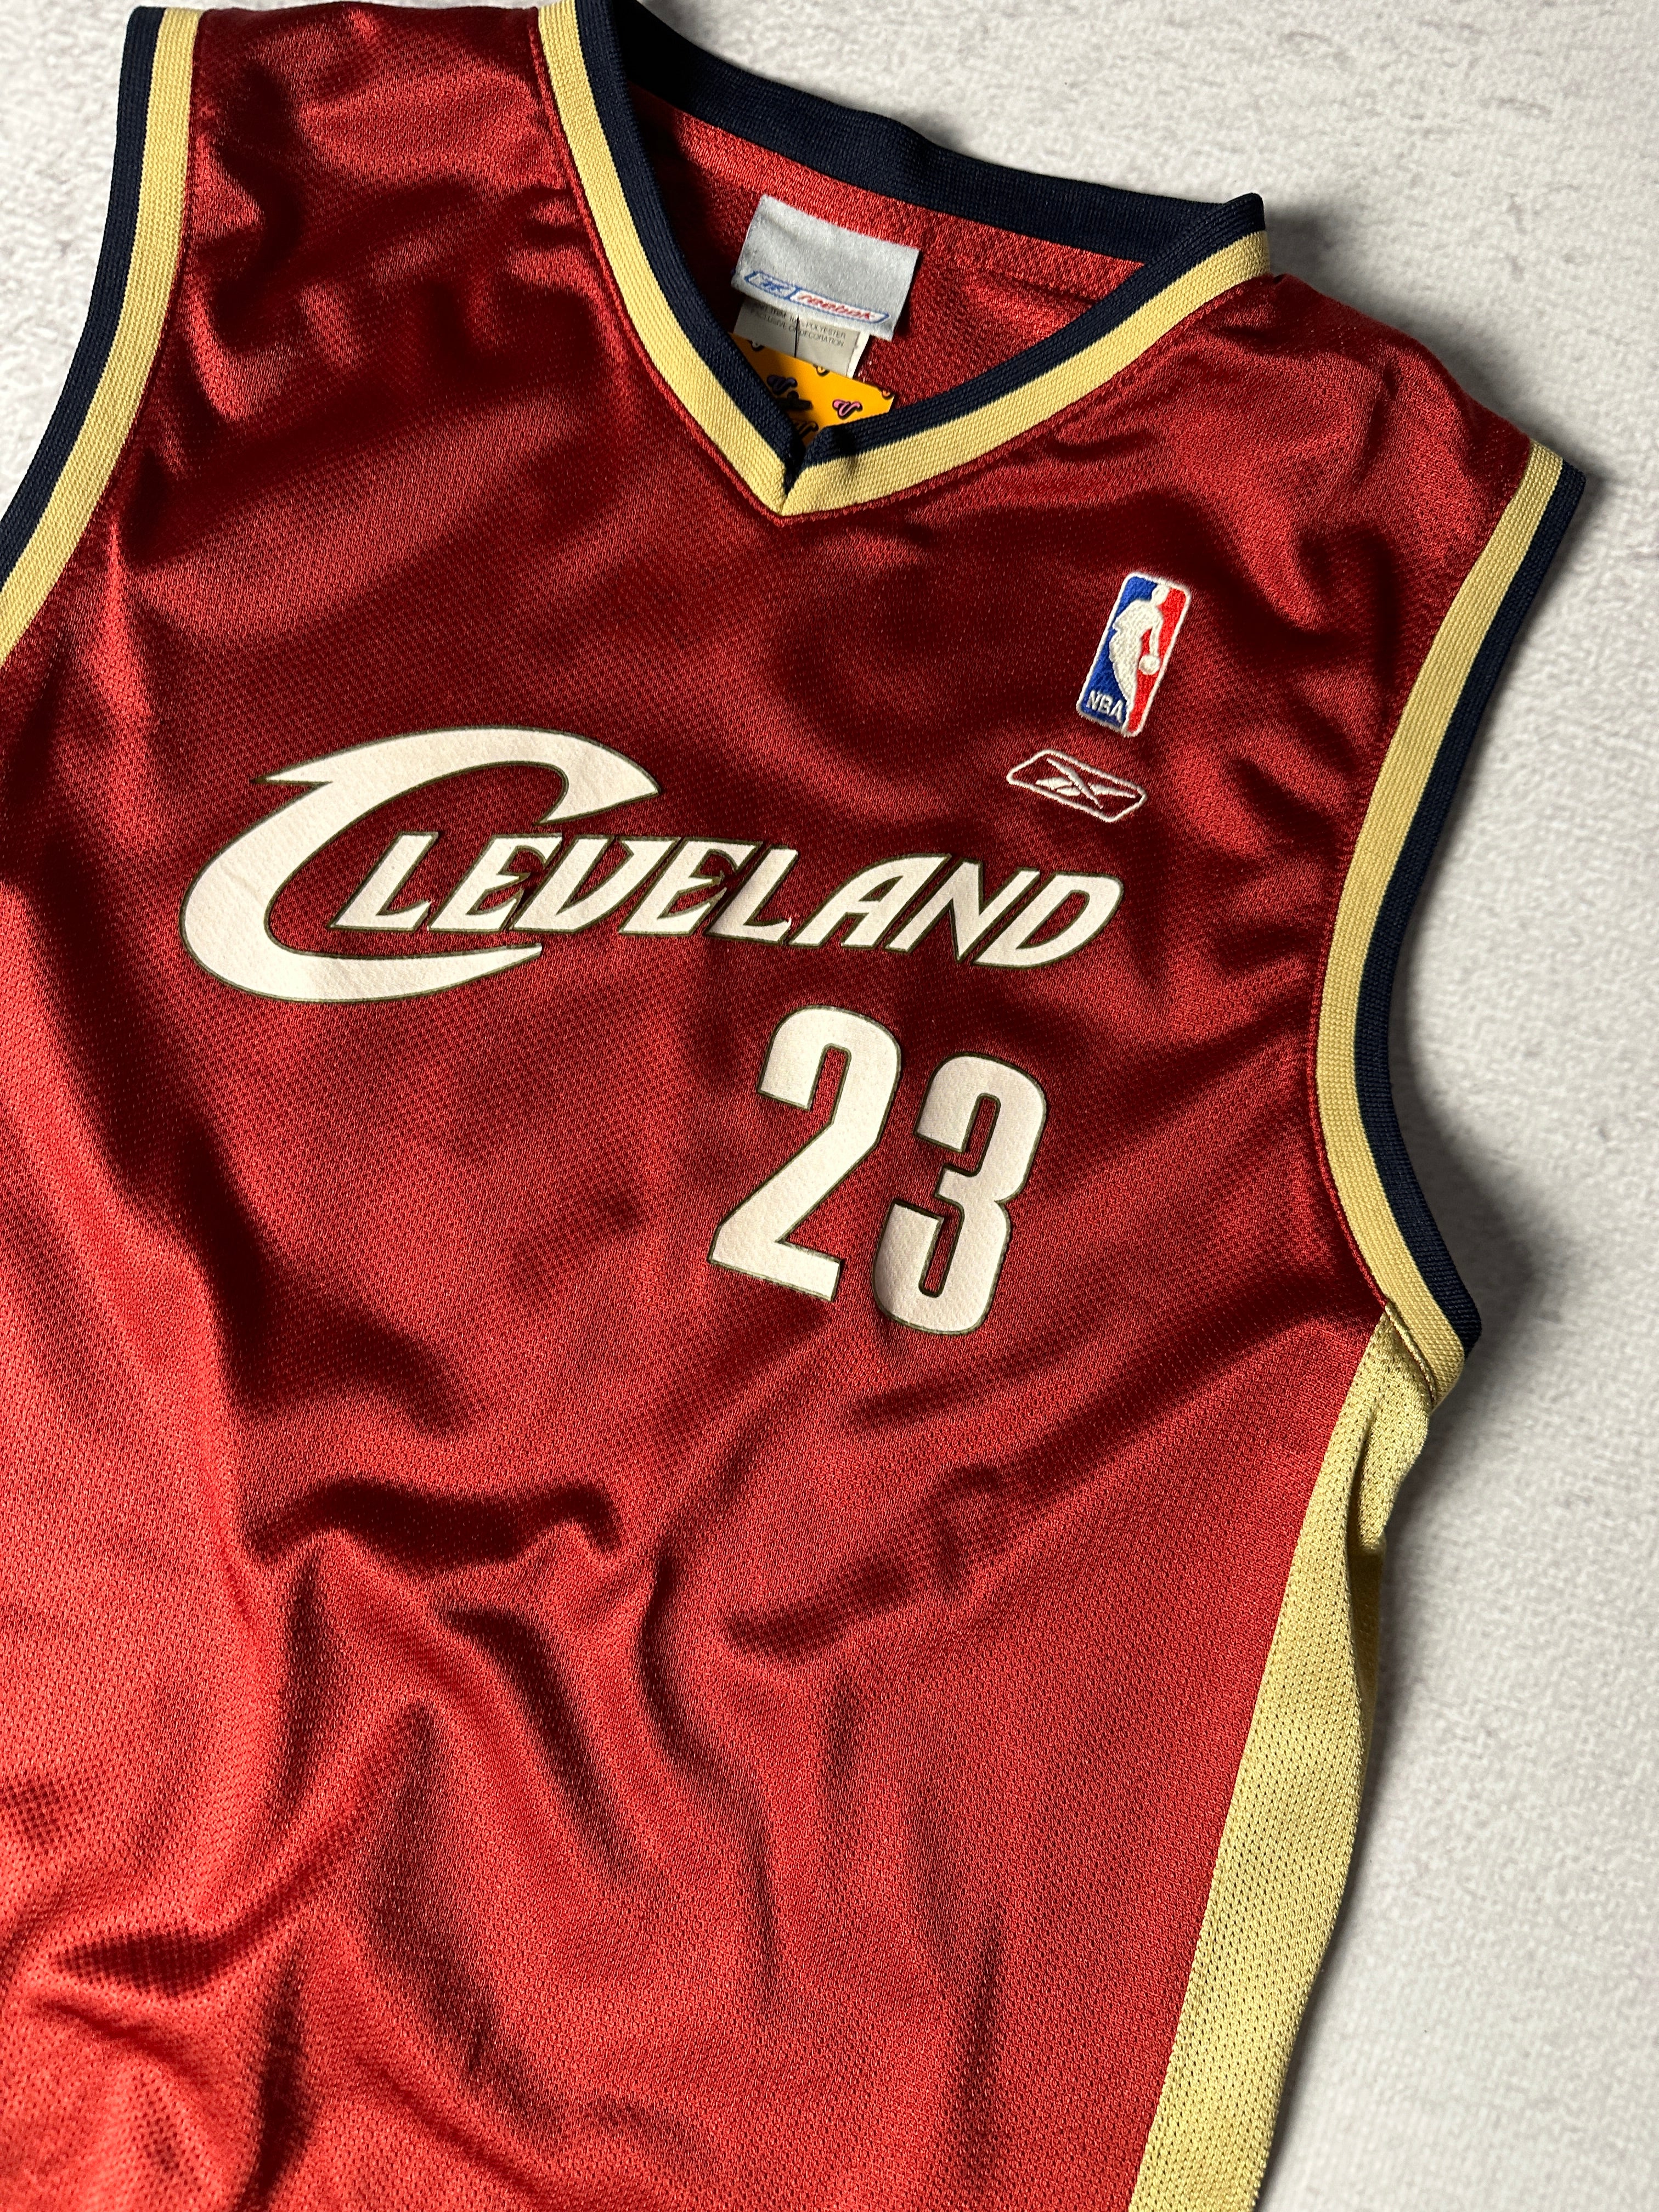 Vintage NBA Cleveland Cavaliers #23 Lebron James Jersey - Women's Small